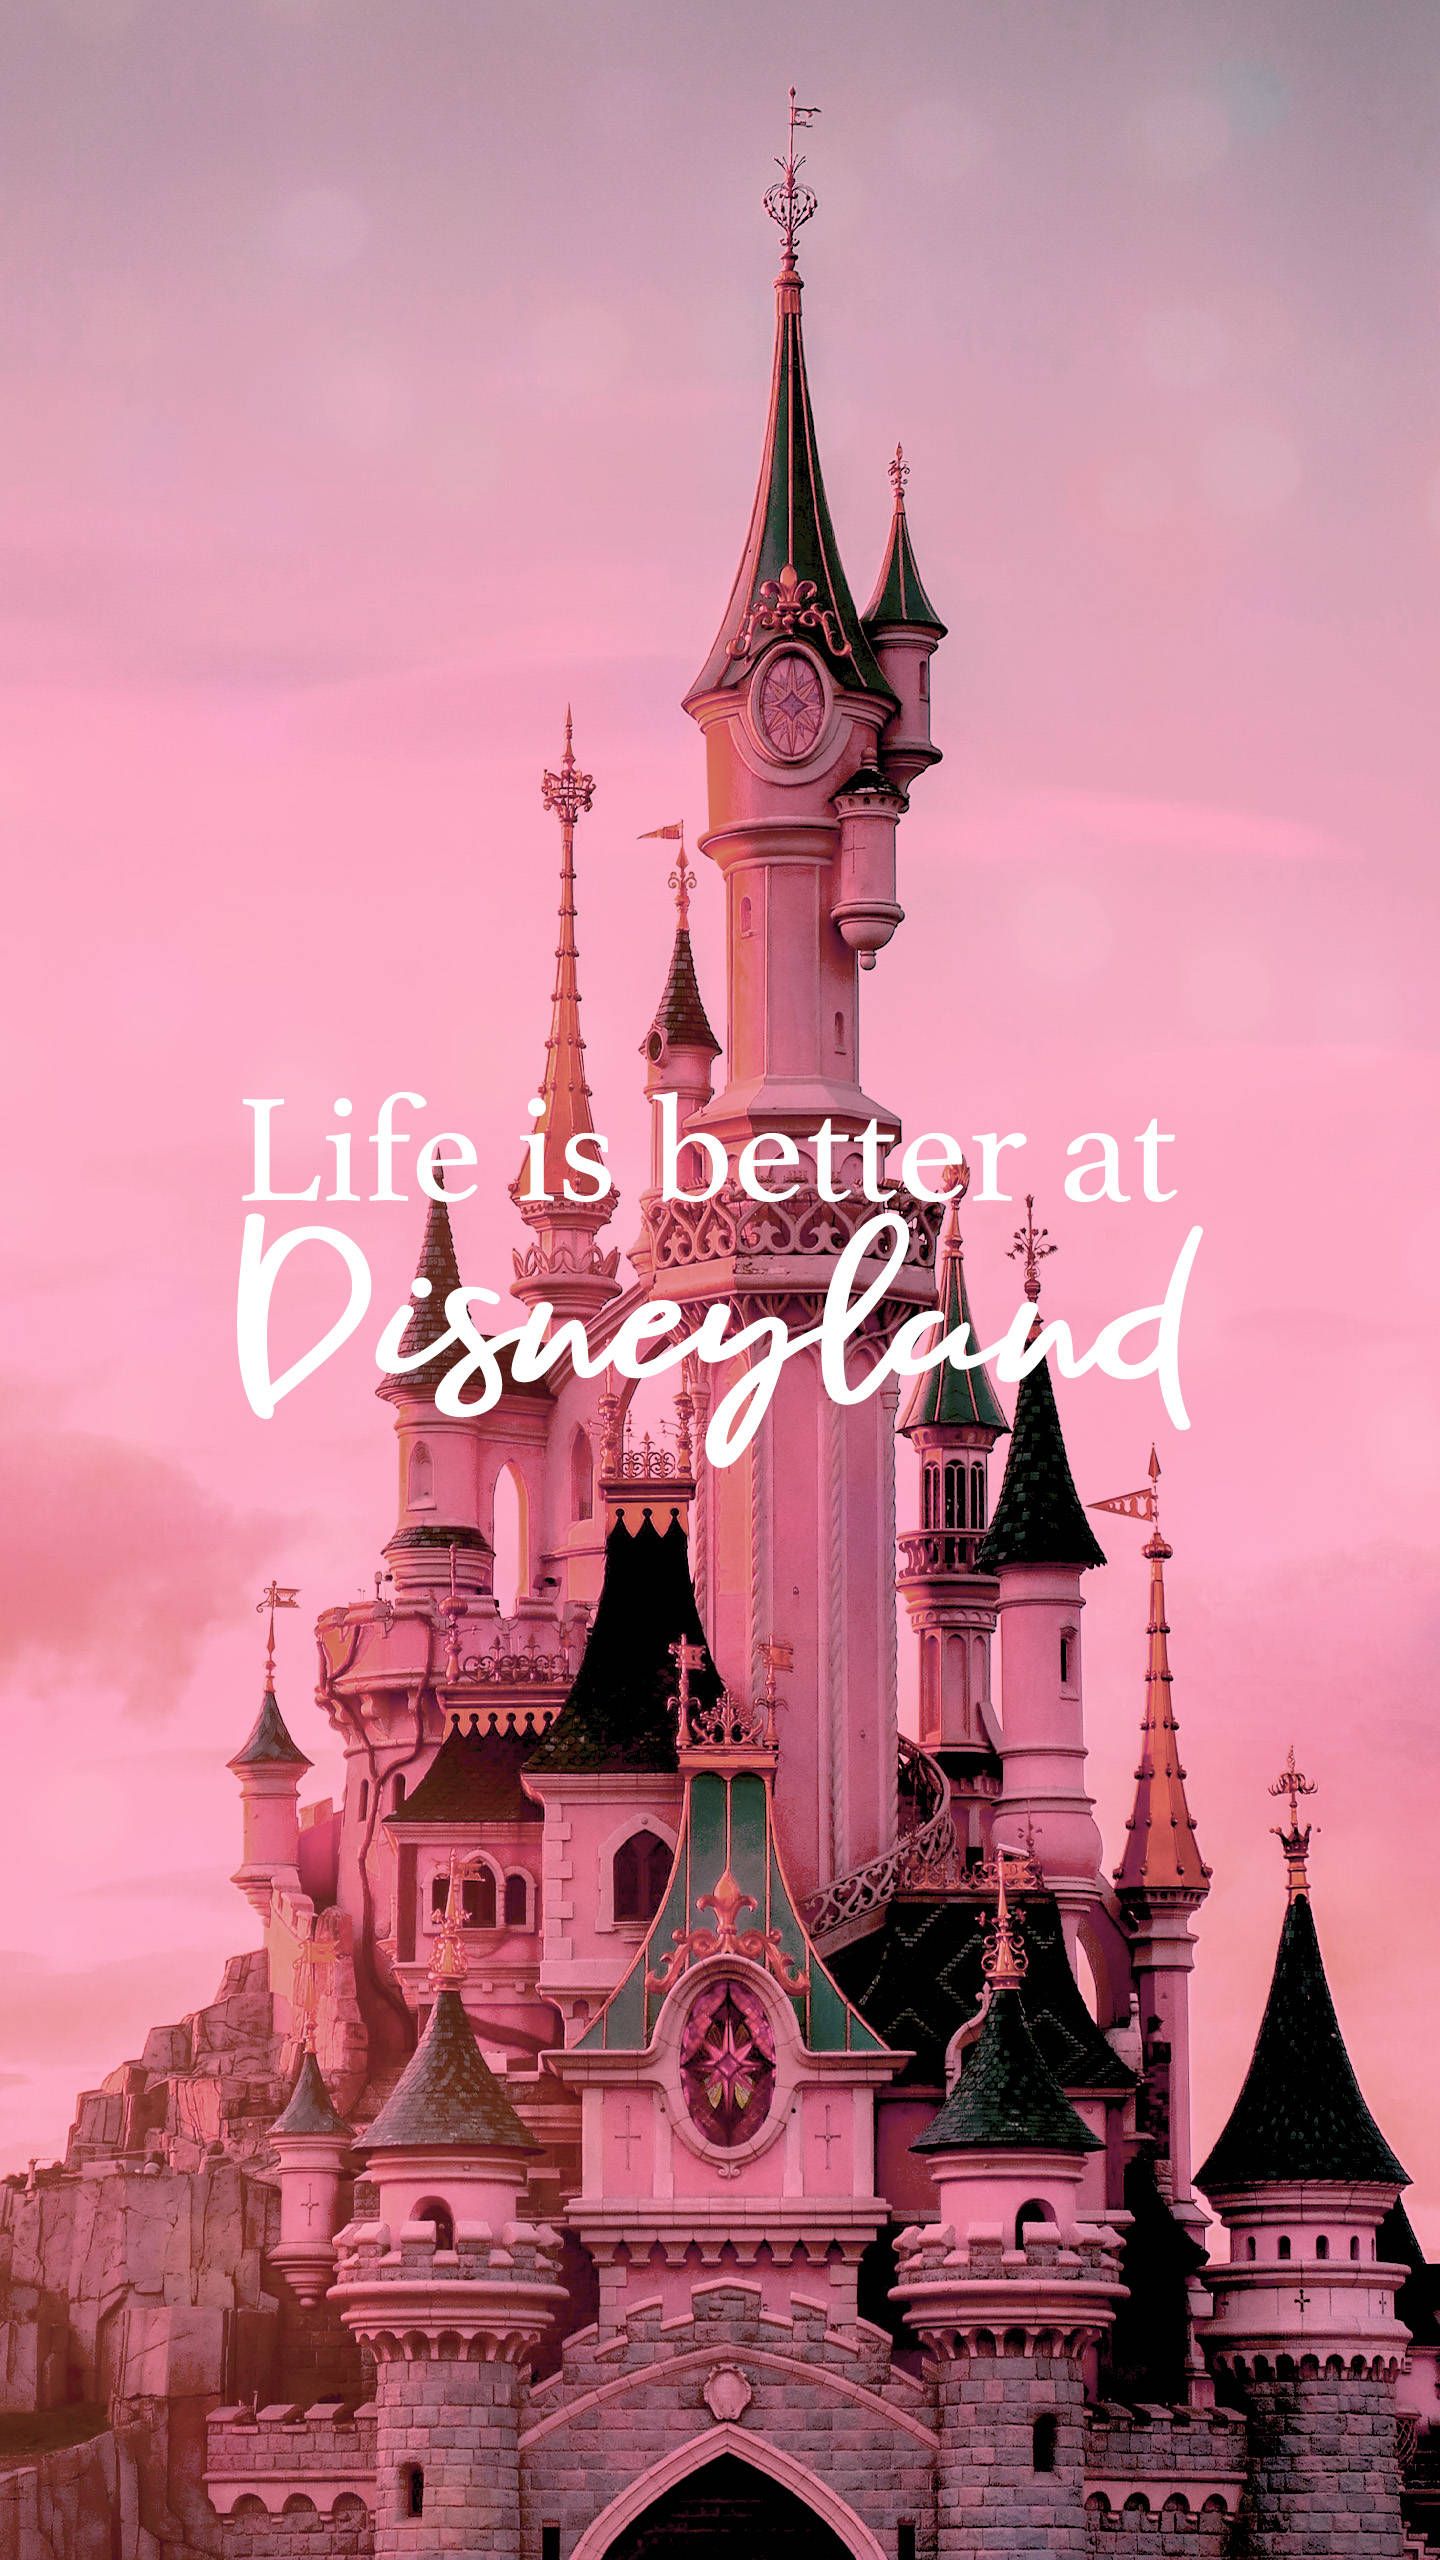 Disneyland castle wallpaper for phone and desktop backgrounds. Get the aesthetic of Disneyland castle without leaving your home. - Disneyland